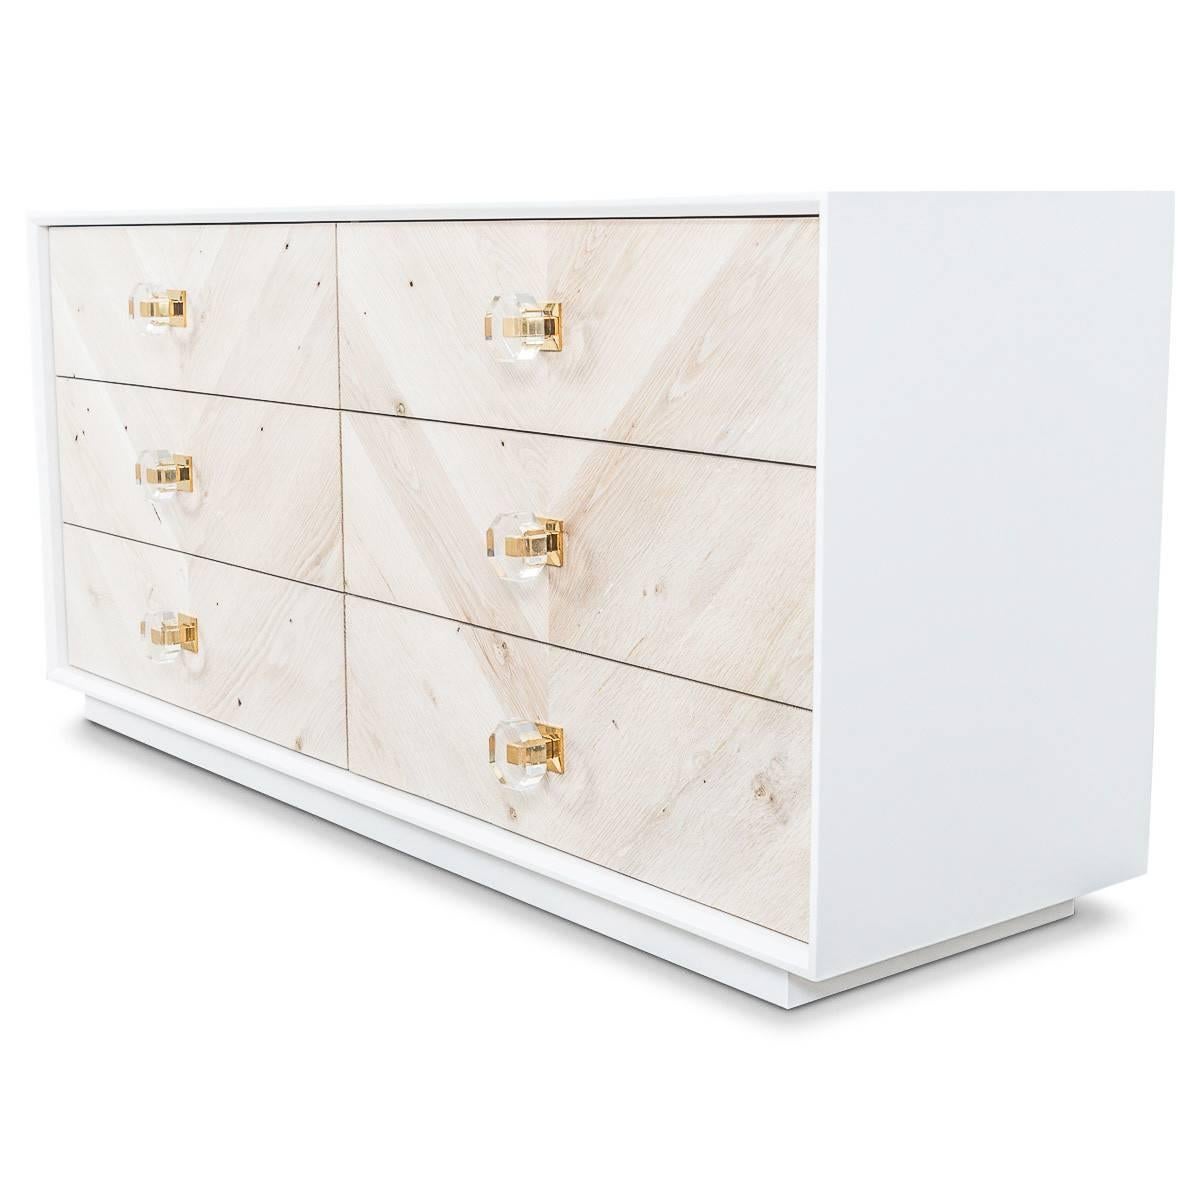 This new credenza uses a bleached rift oak door fronts made in a wide chevron pattern. Coupled with our Hexagon Lucite knobs makes this a perfect addition to any bedroom.

Dimensions